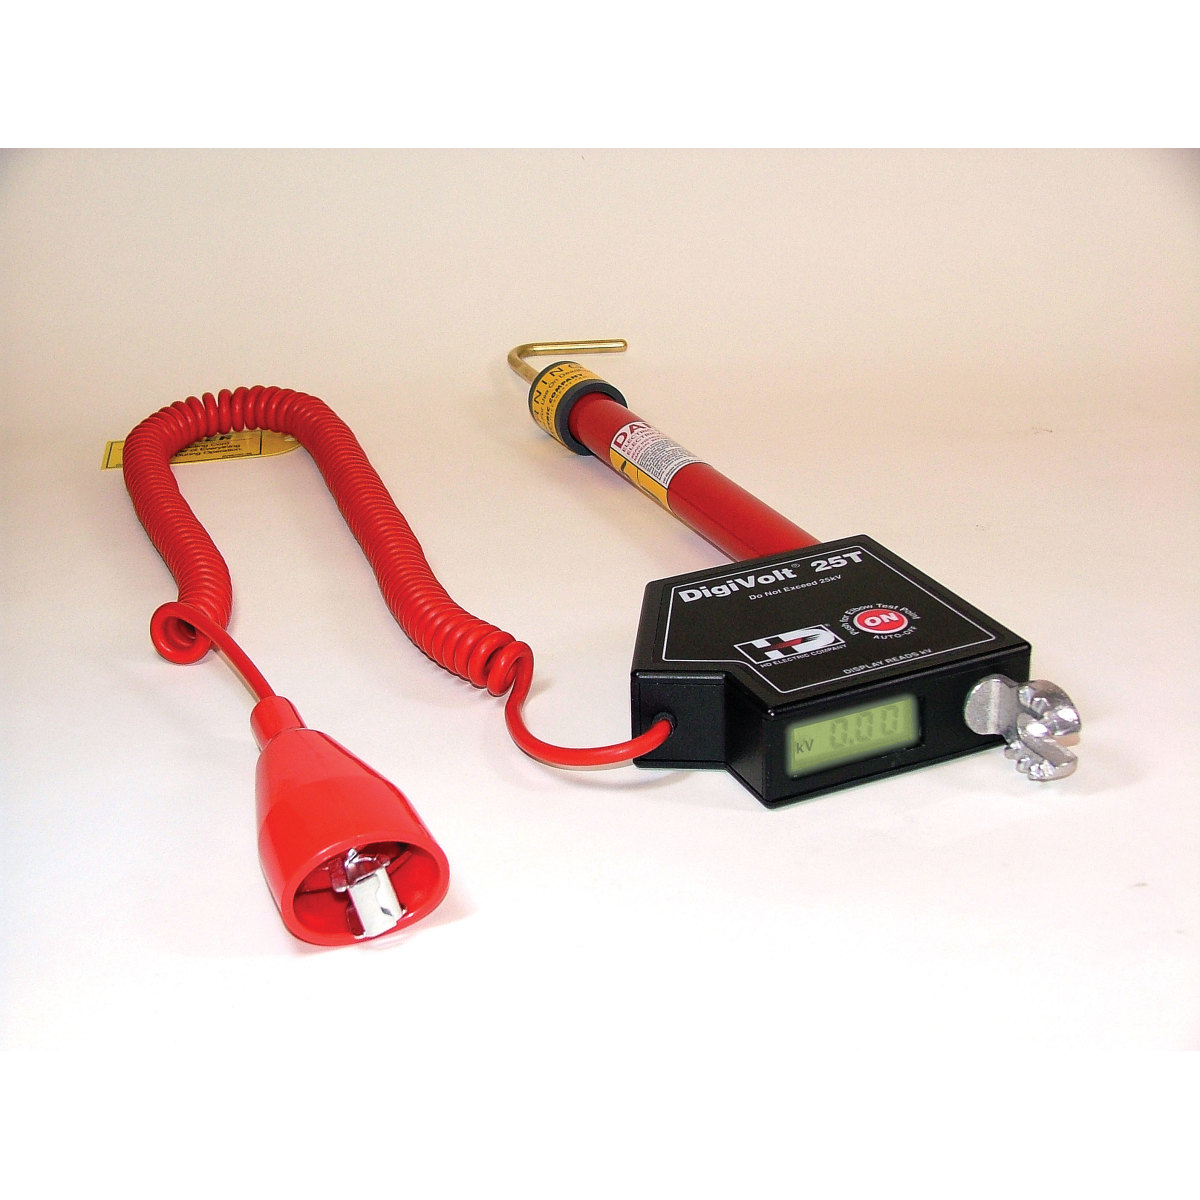 Measures voltage from 50V to 25kV.  Auto-ranging – no settings required.  Capacitive Test Point mode.  Auto-shutoff and low battery indicator features.  Versatile for overhead and underground applications